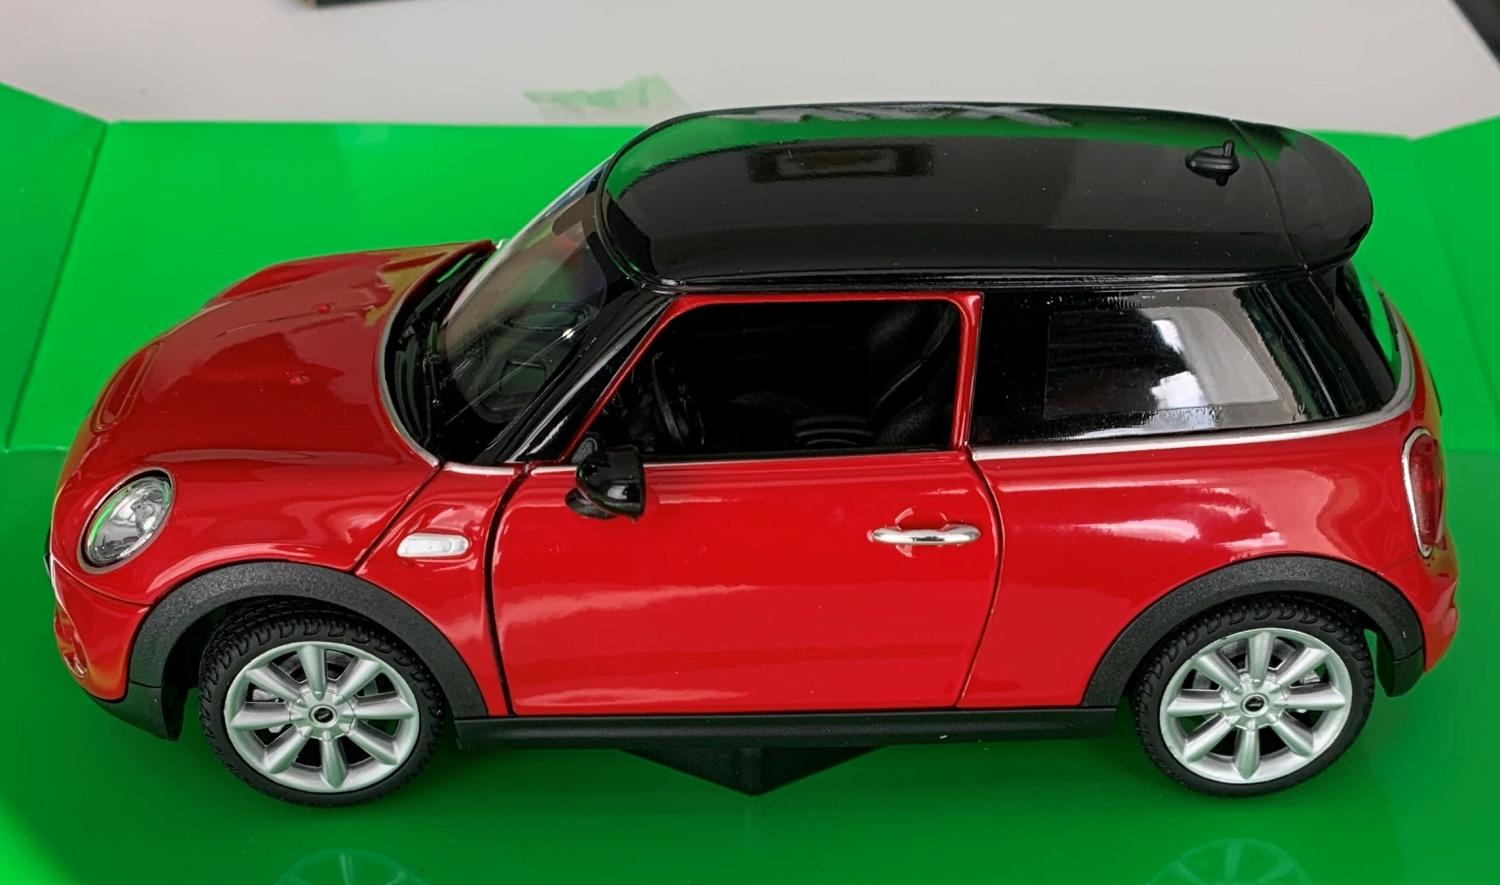 Mini Cooper S Hatch in red with black roof 1:24 scale model from Welly